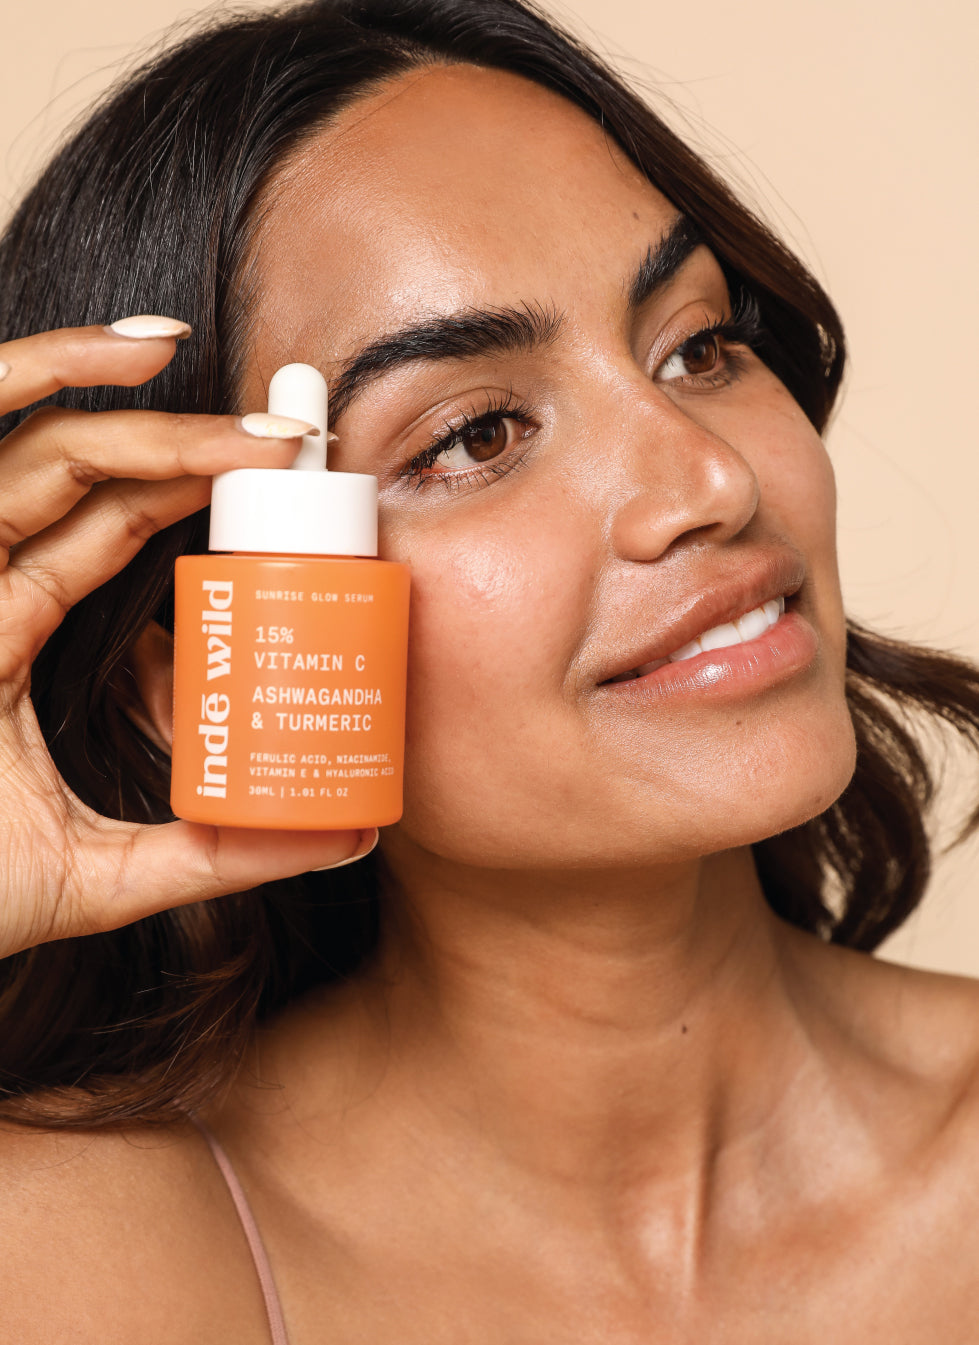 Diipa’s Summertime Tips to Lock in AM-Serum Freshness